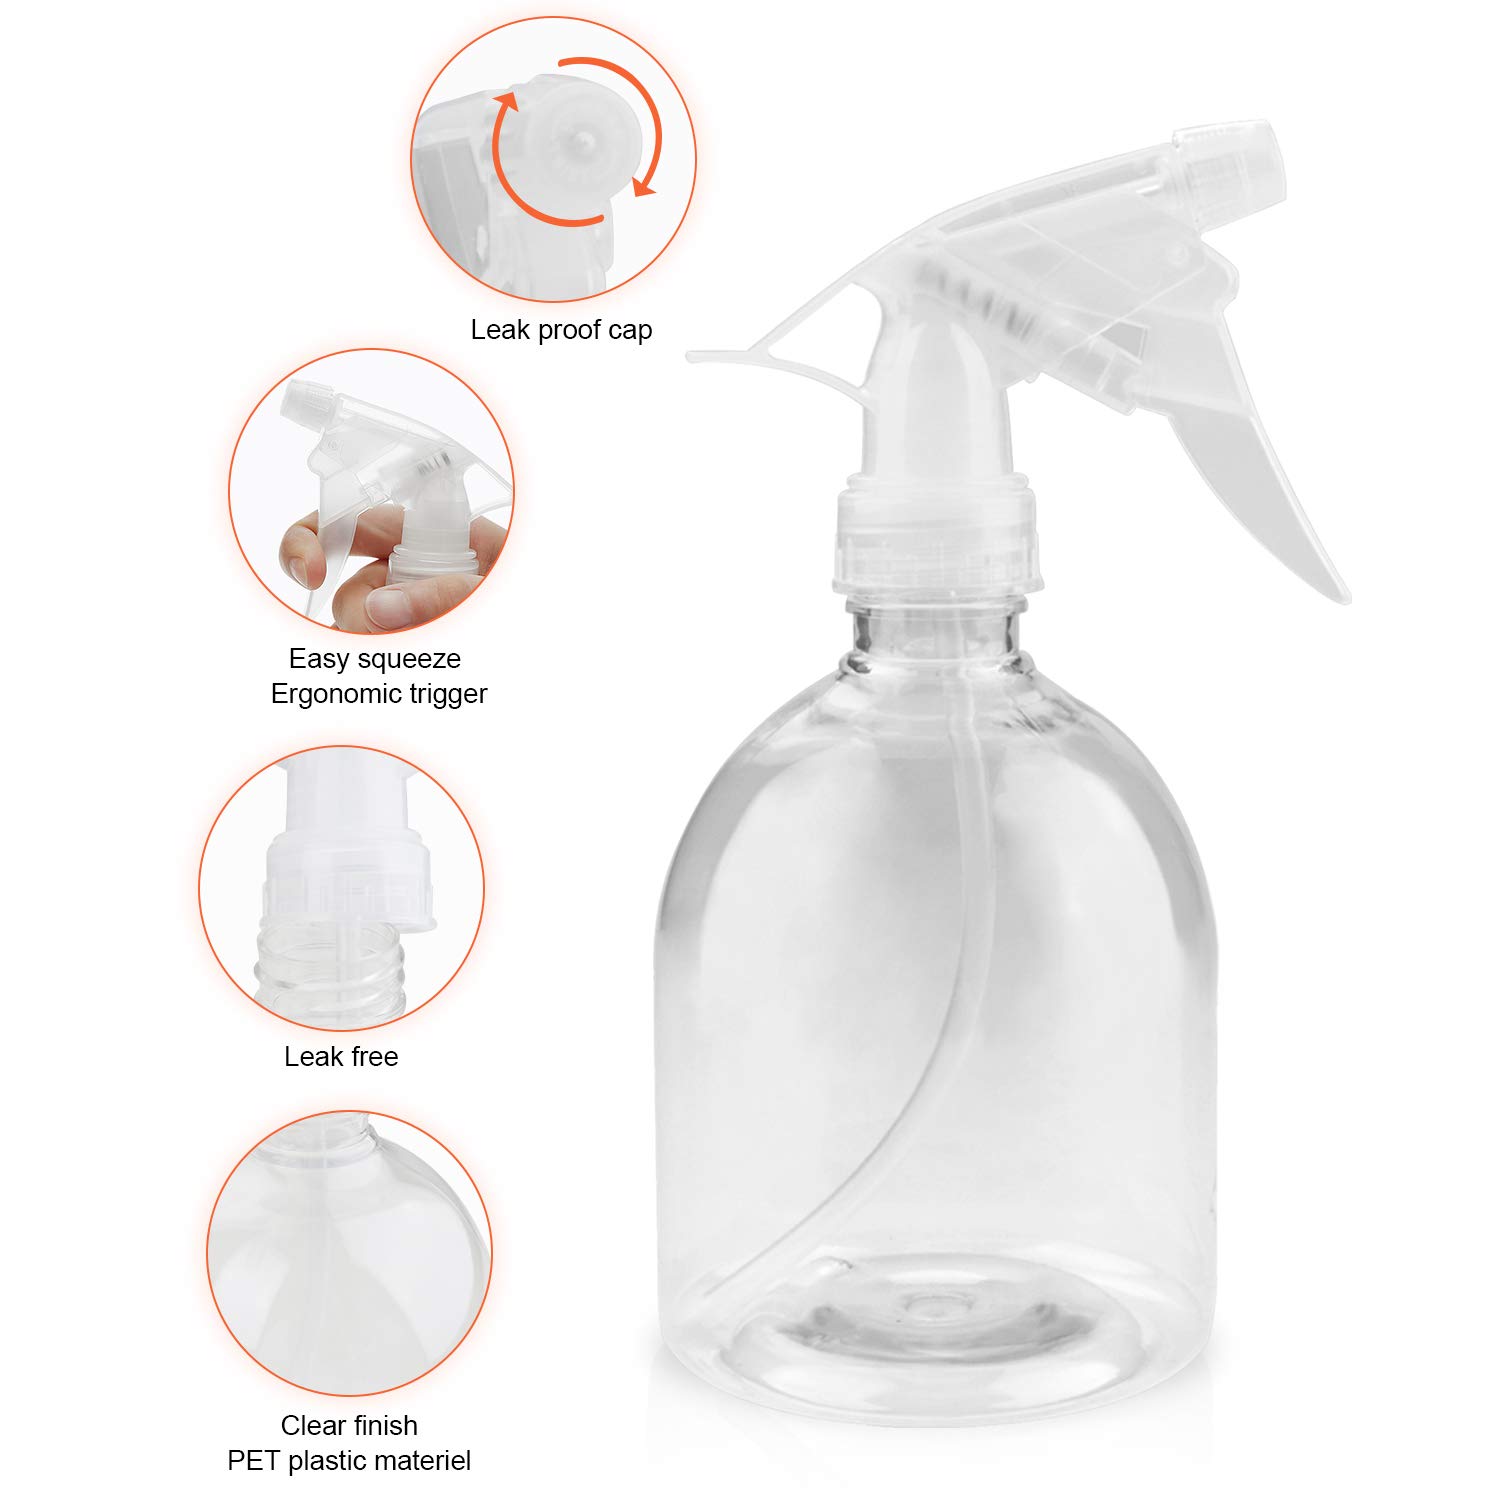 Plastic Spray Bottle,16oz/500ml Empty Clear Spray Bottles for Cleaning Solutions,Hair,Oils,Adjustable Head Sprayer Water Squirt Bottle(6 PACK)